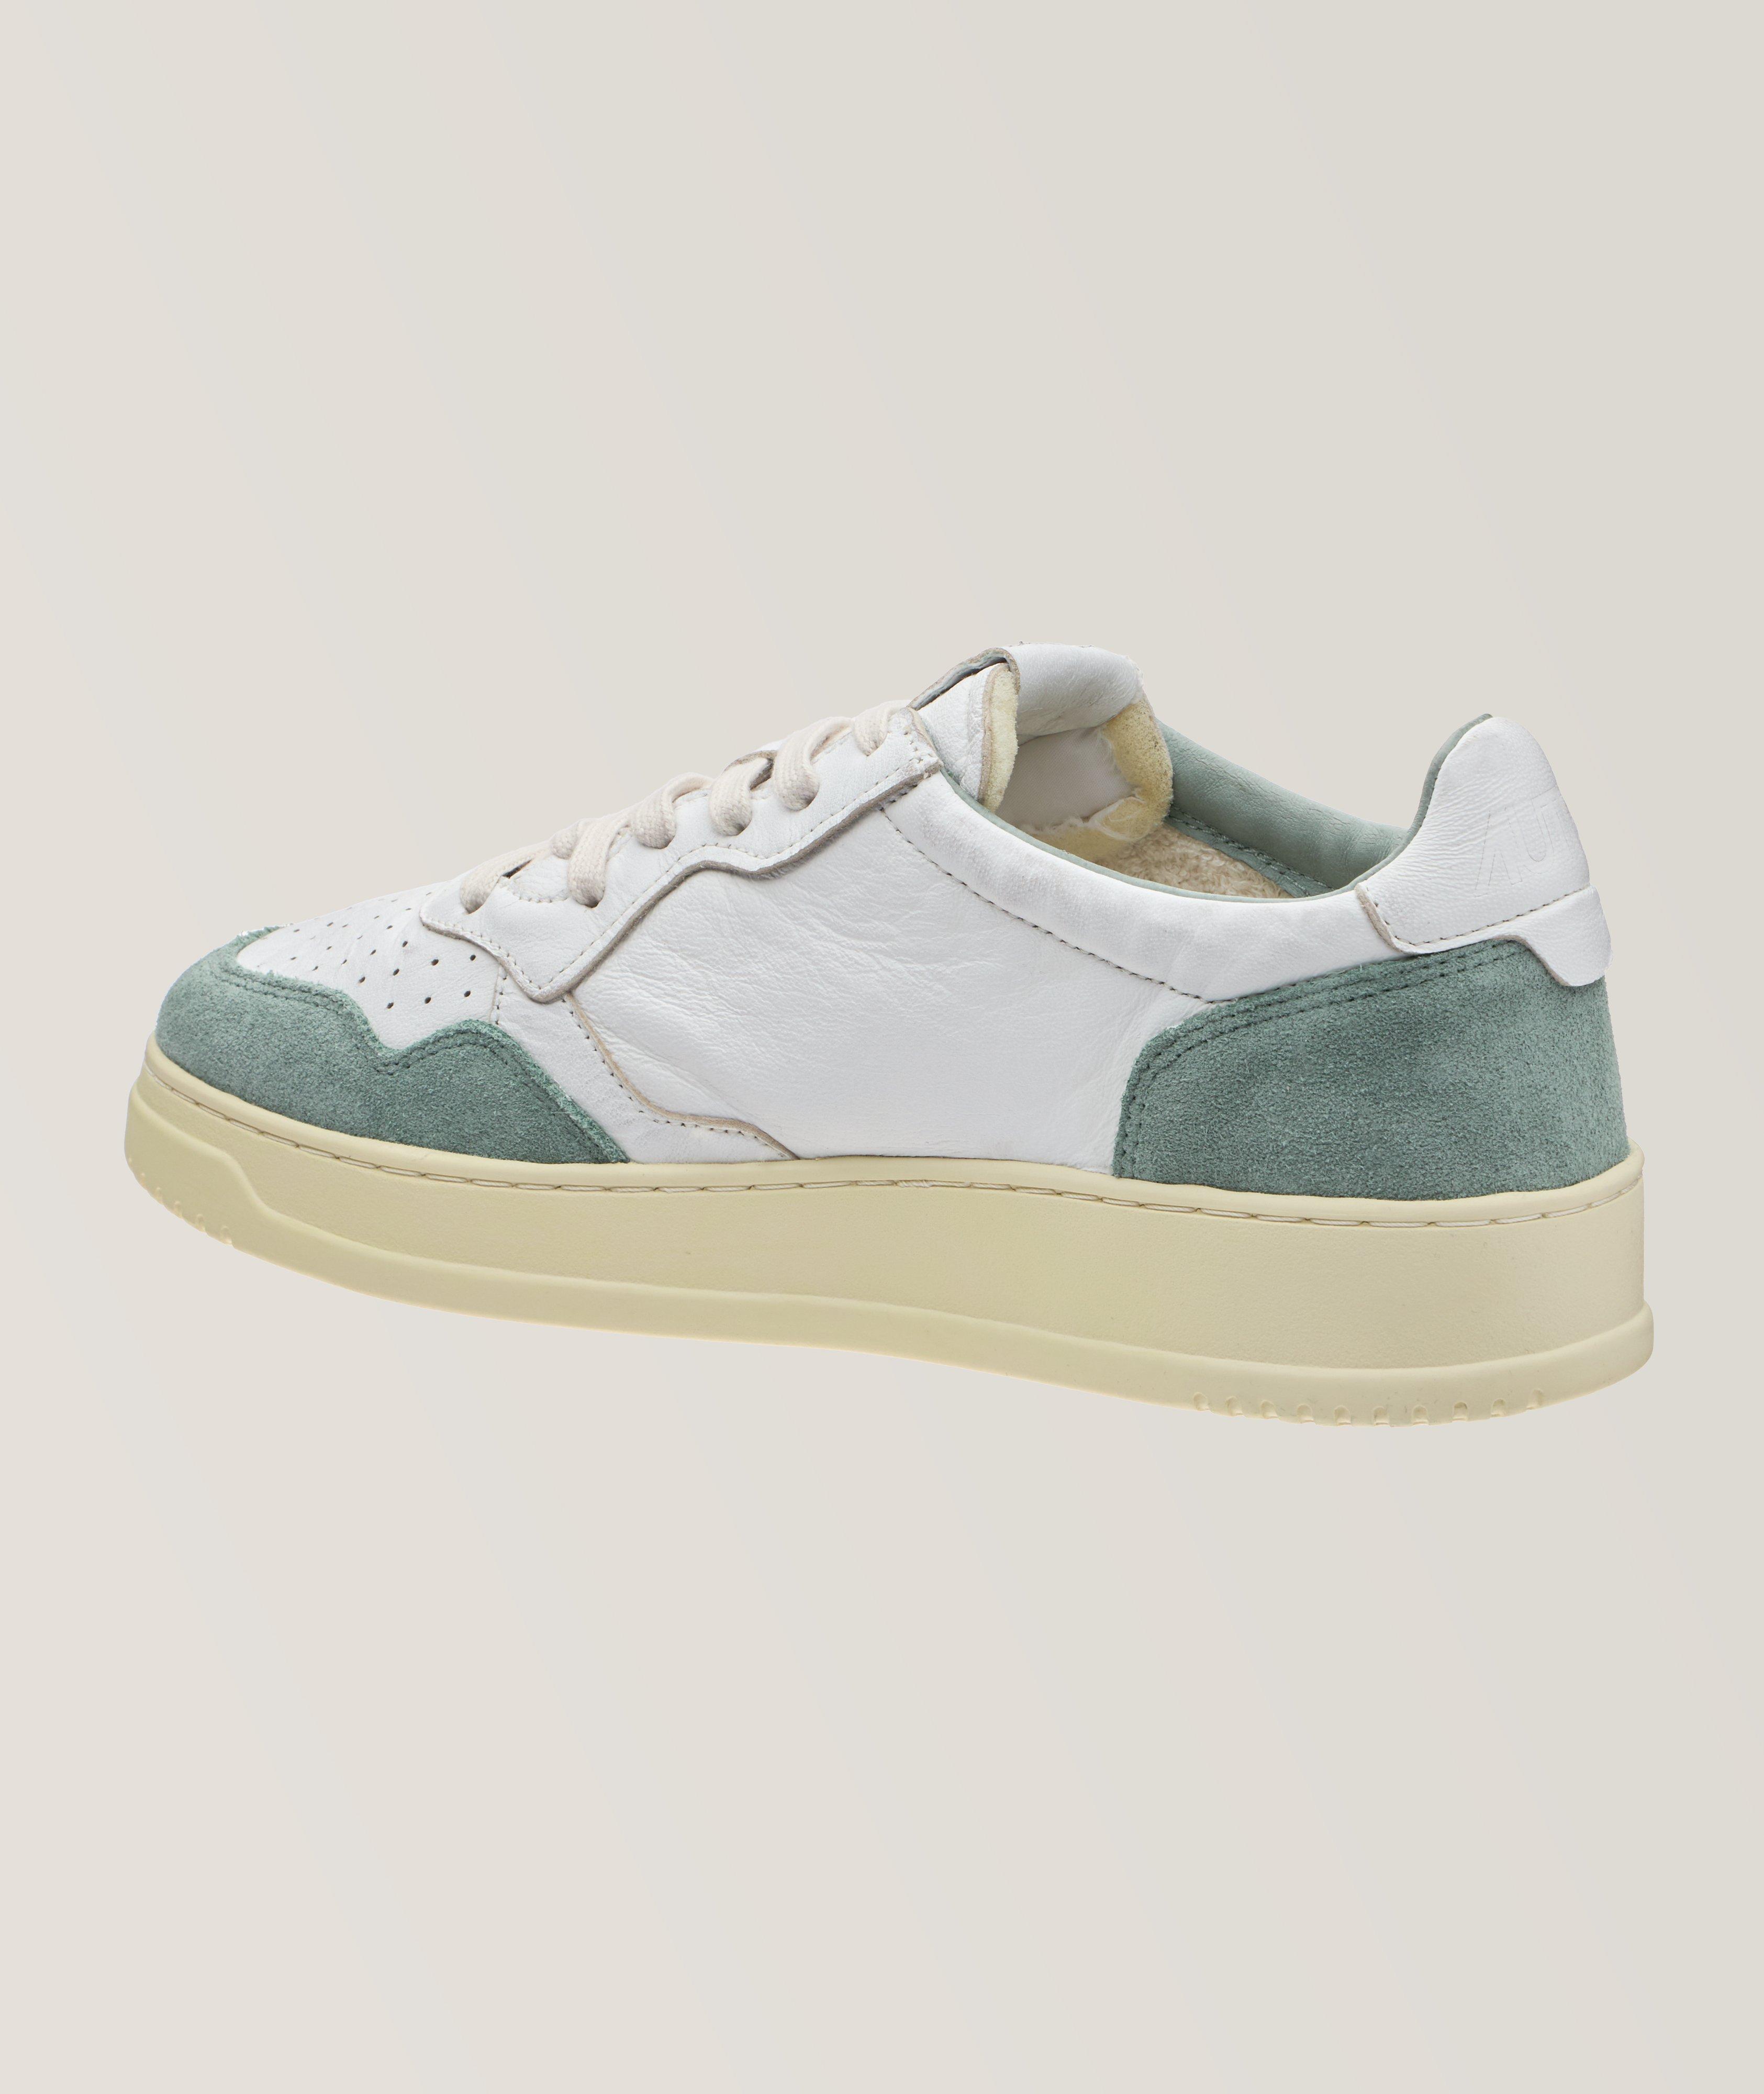 Medalist Two-Tone Washed Goatskin Sneakers image 1